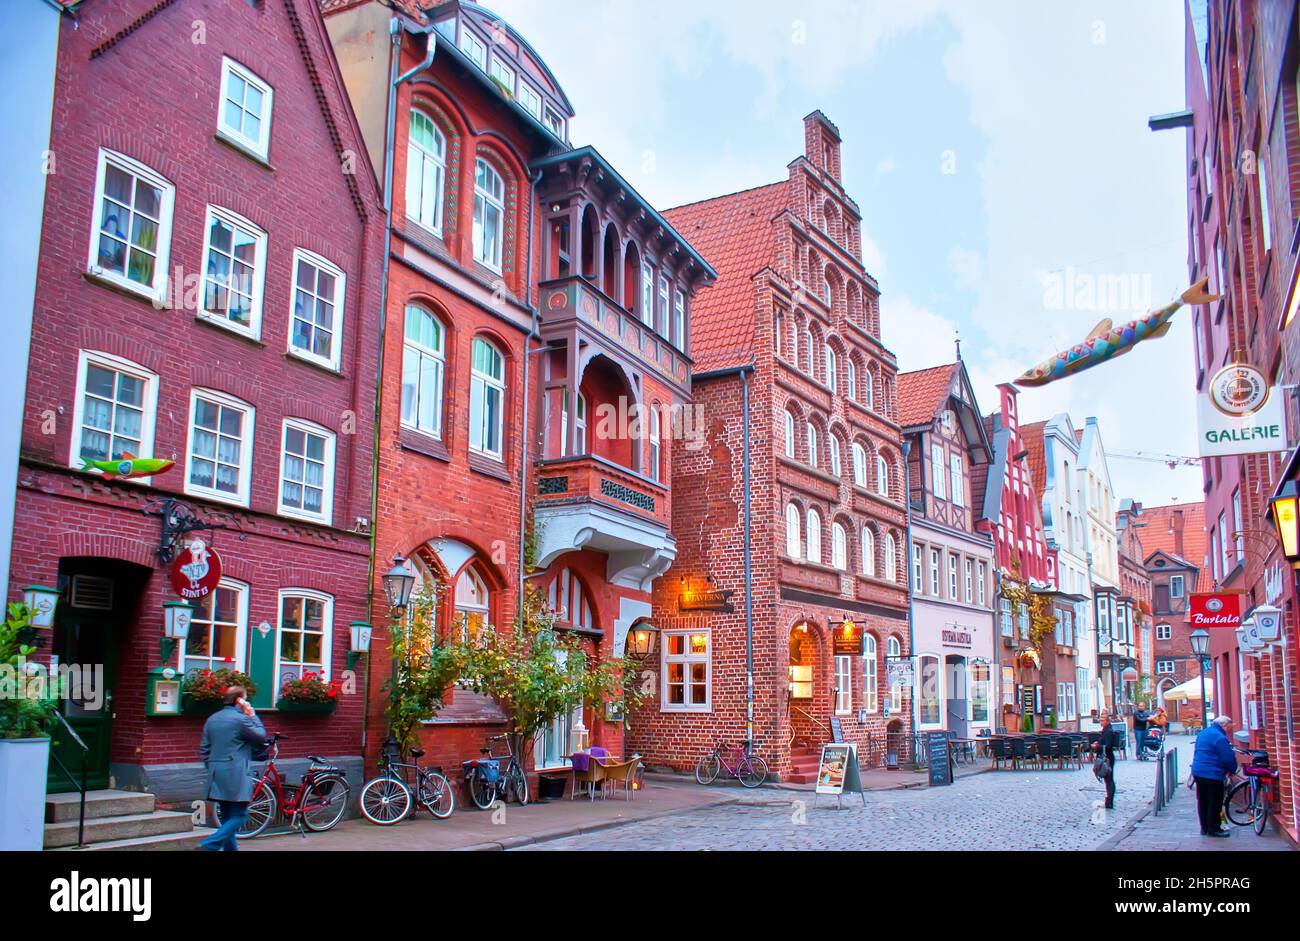 LUNEBURG, GERMANY - NOVEMBER 20, 2019: Altstadt of Luneburg with its medieval houses and narrow old streets is a pearl of Lower Saxony Stock Photo